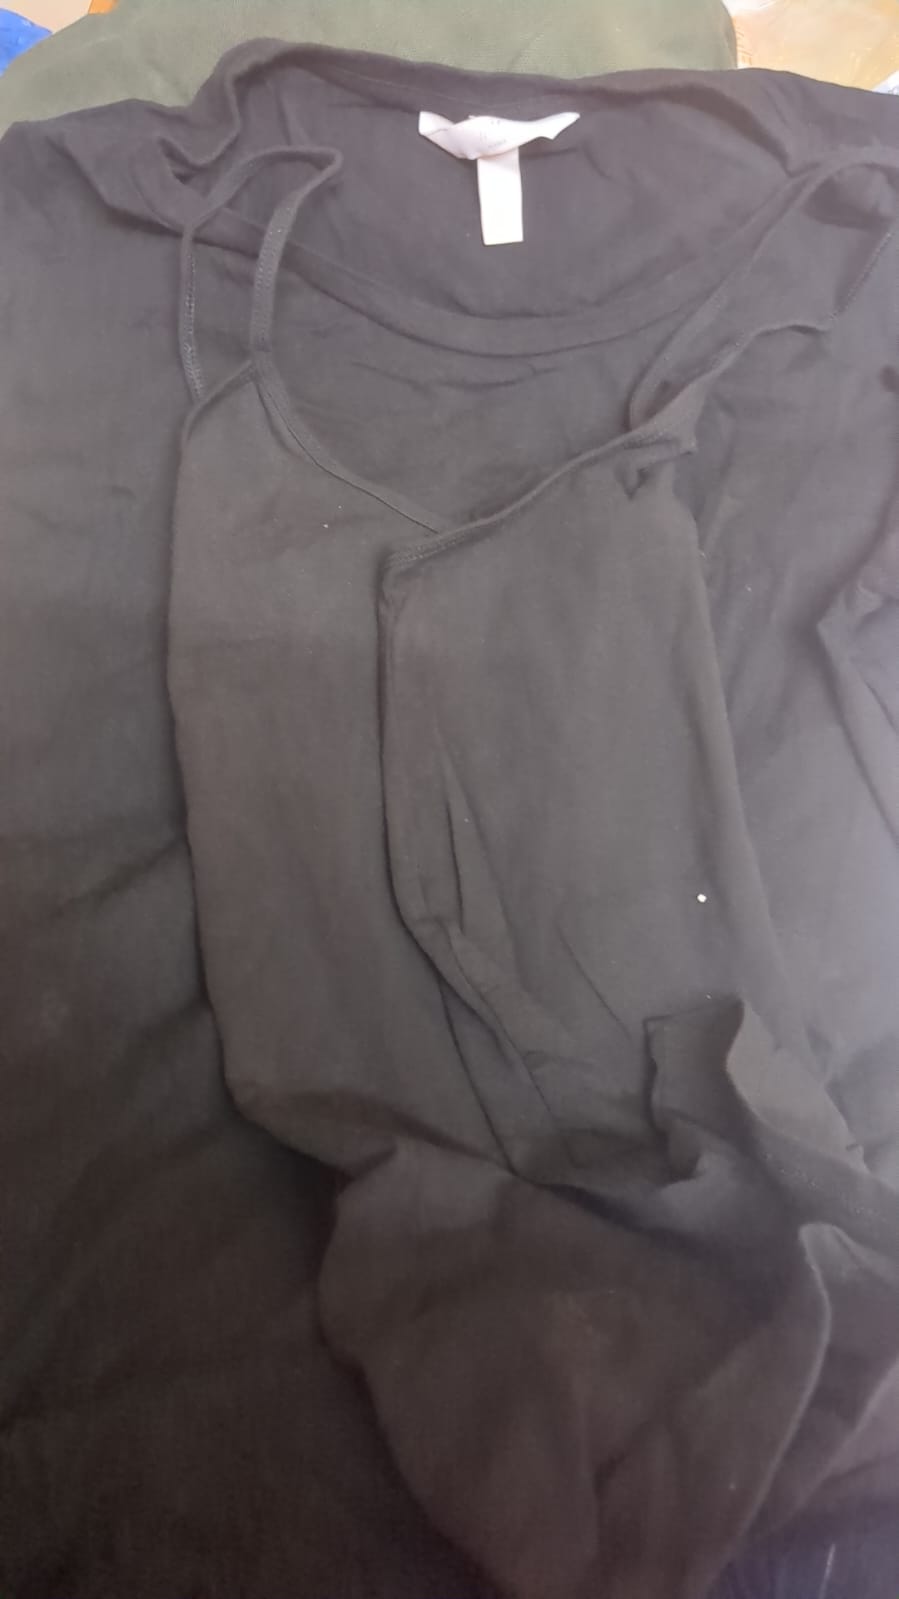 maternity set for free, as a gift from another mom. Donate preloved !